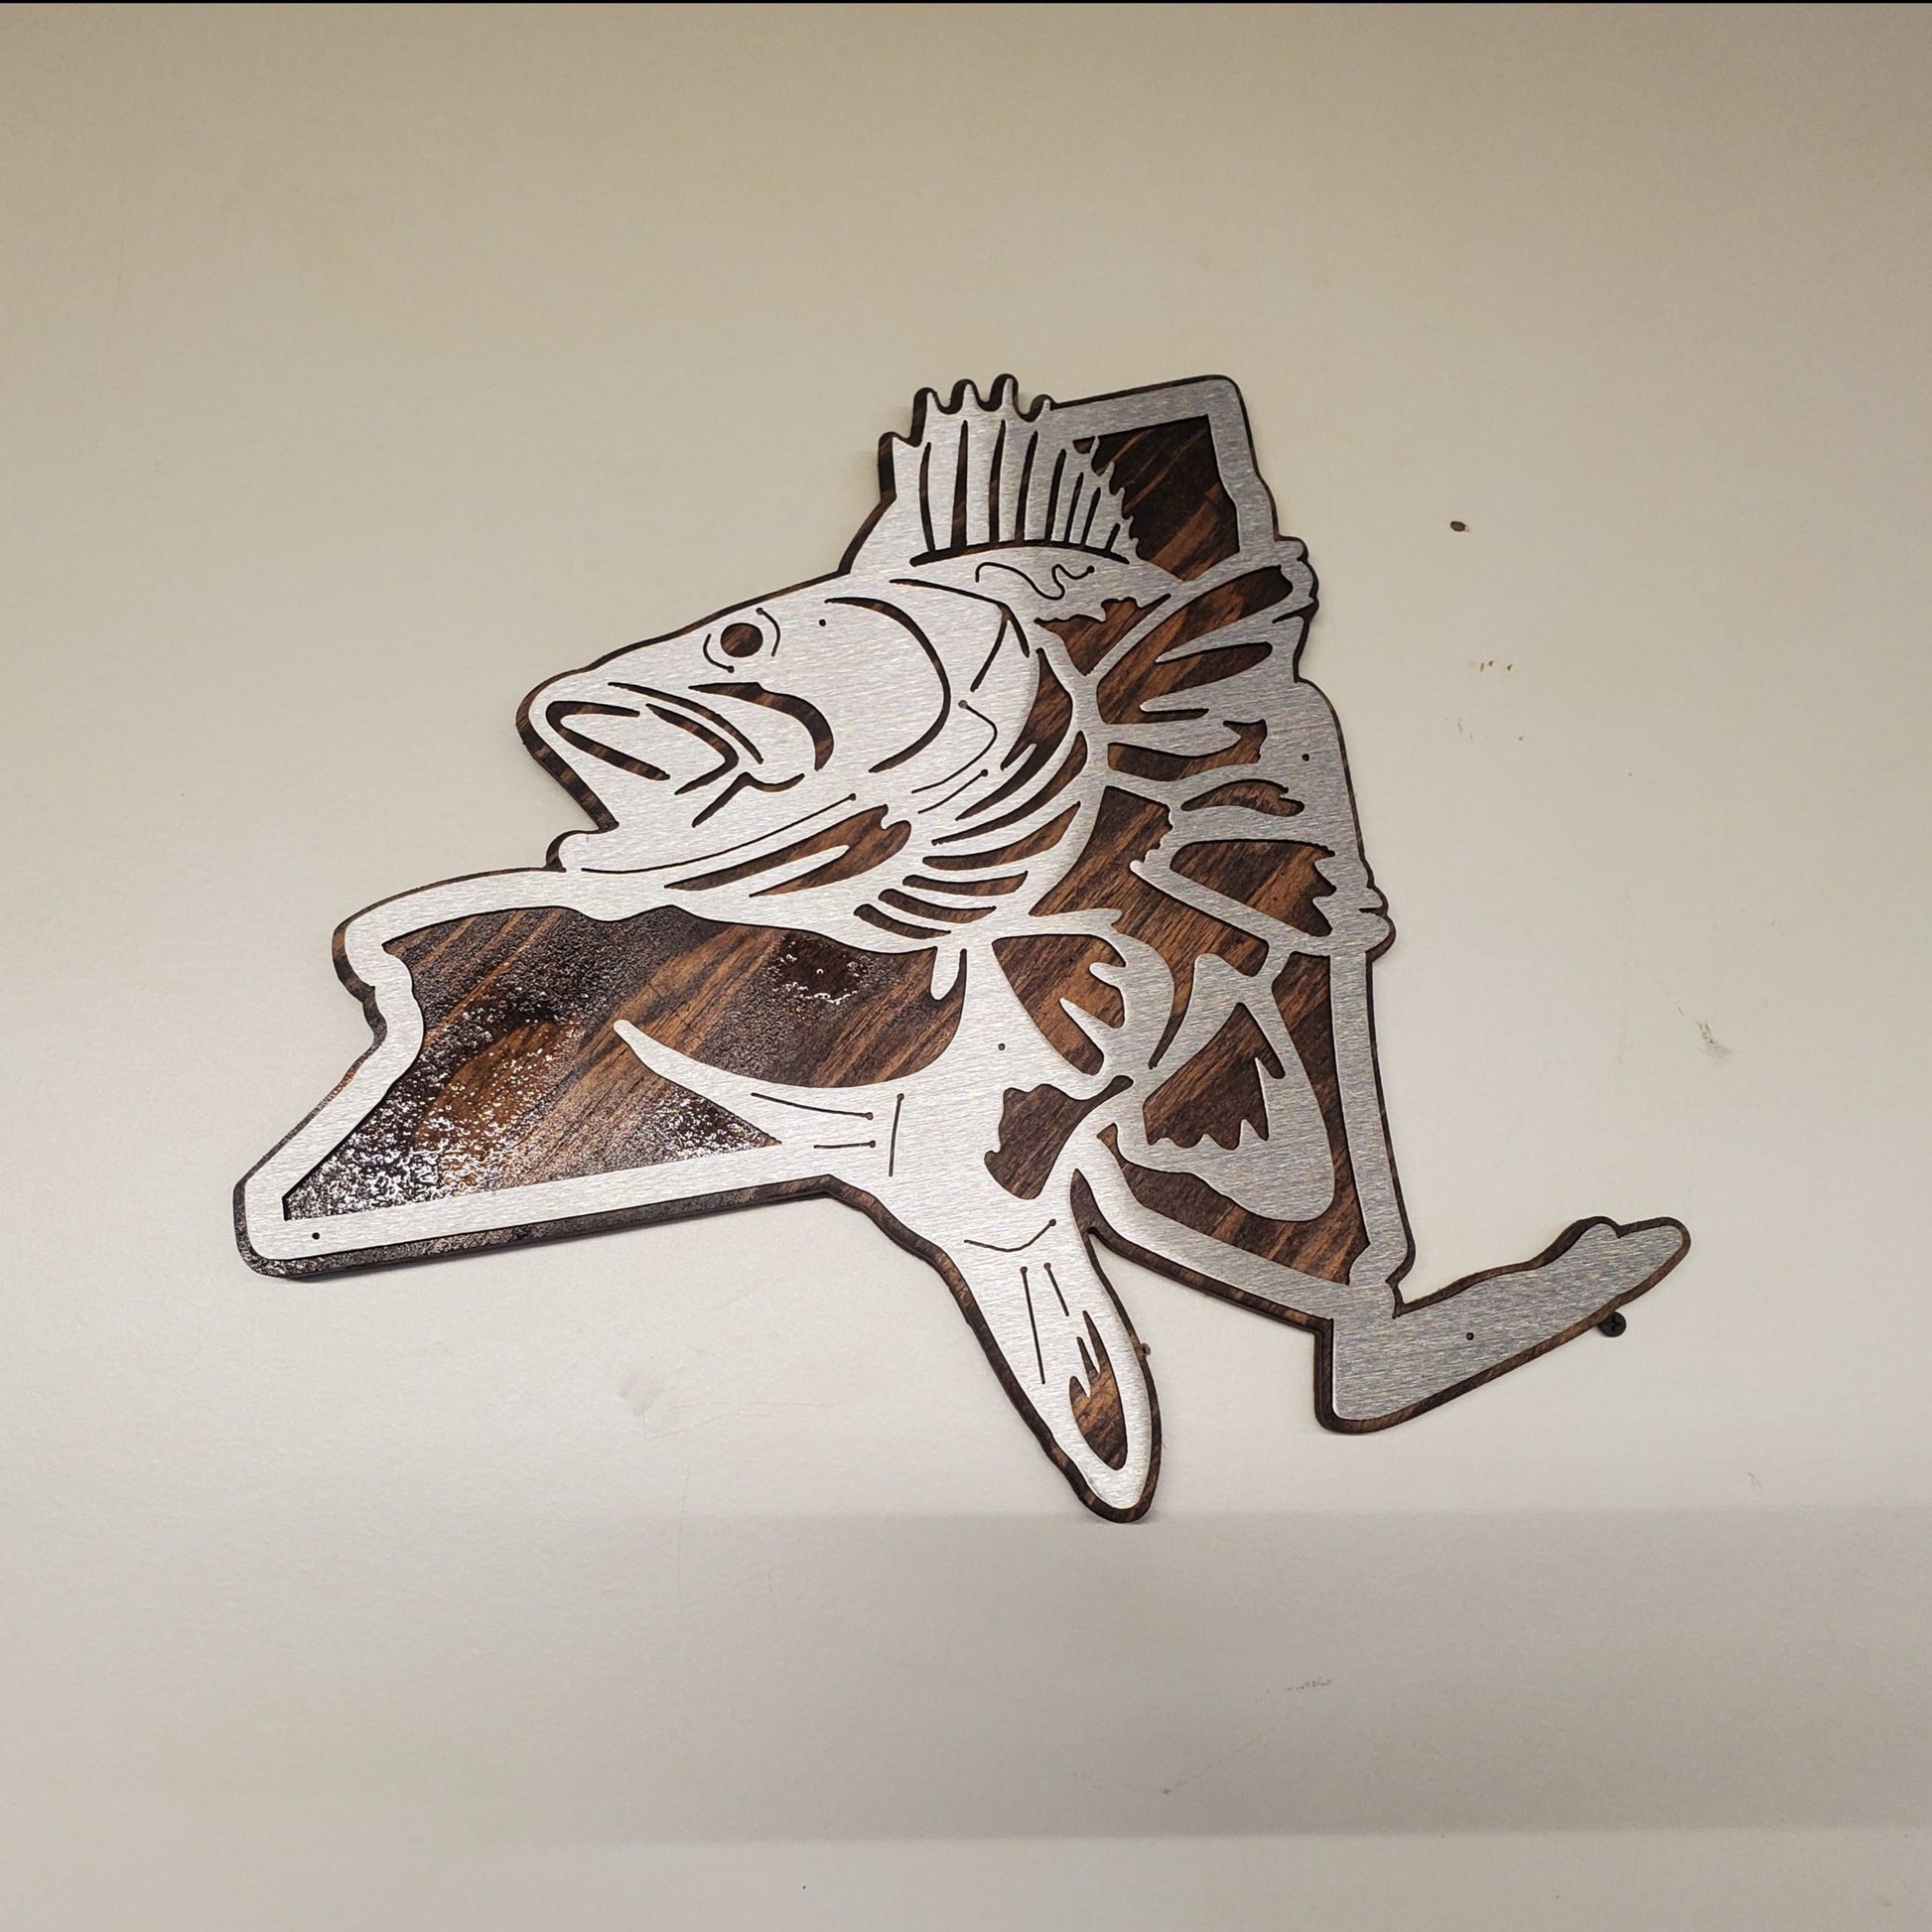 CNC metal cut out of the state of New York with a Walleye fish in the center, mounted on a stained wood background. Available in multiple sizes and customizable for any state shape. Made in a small family shop in America.